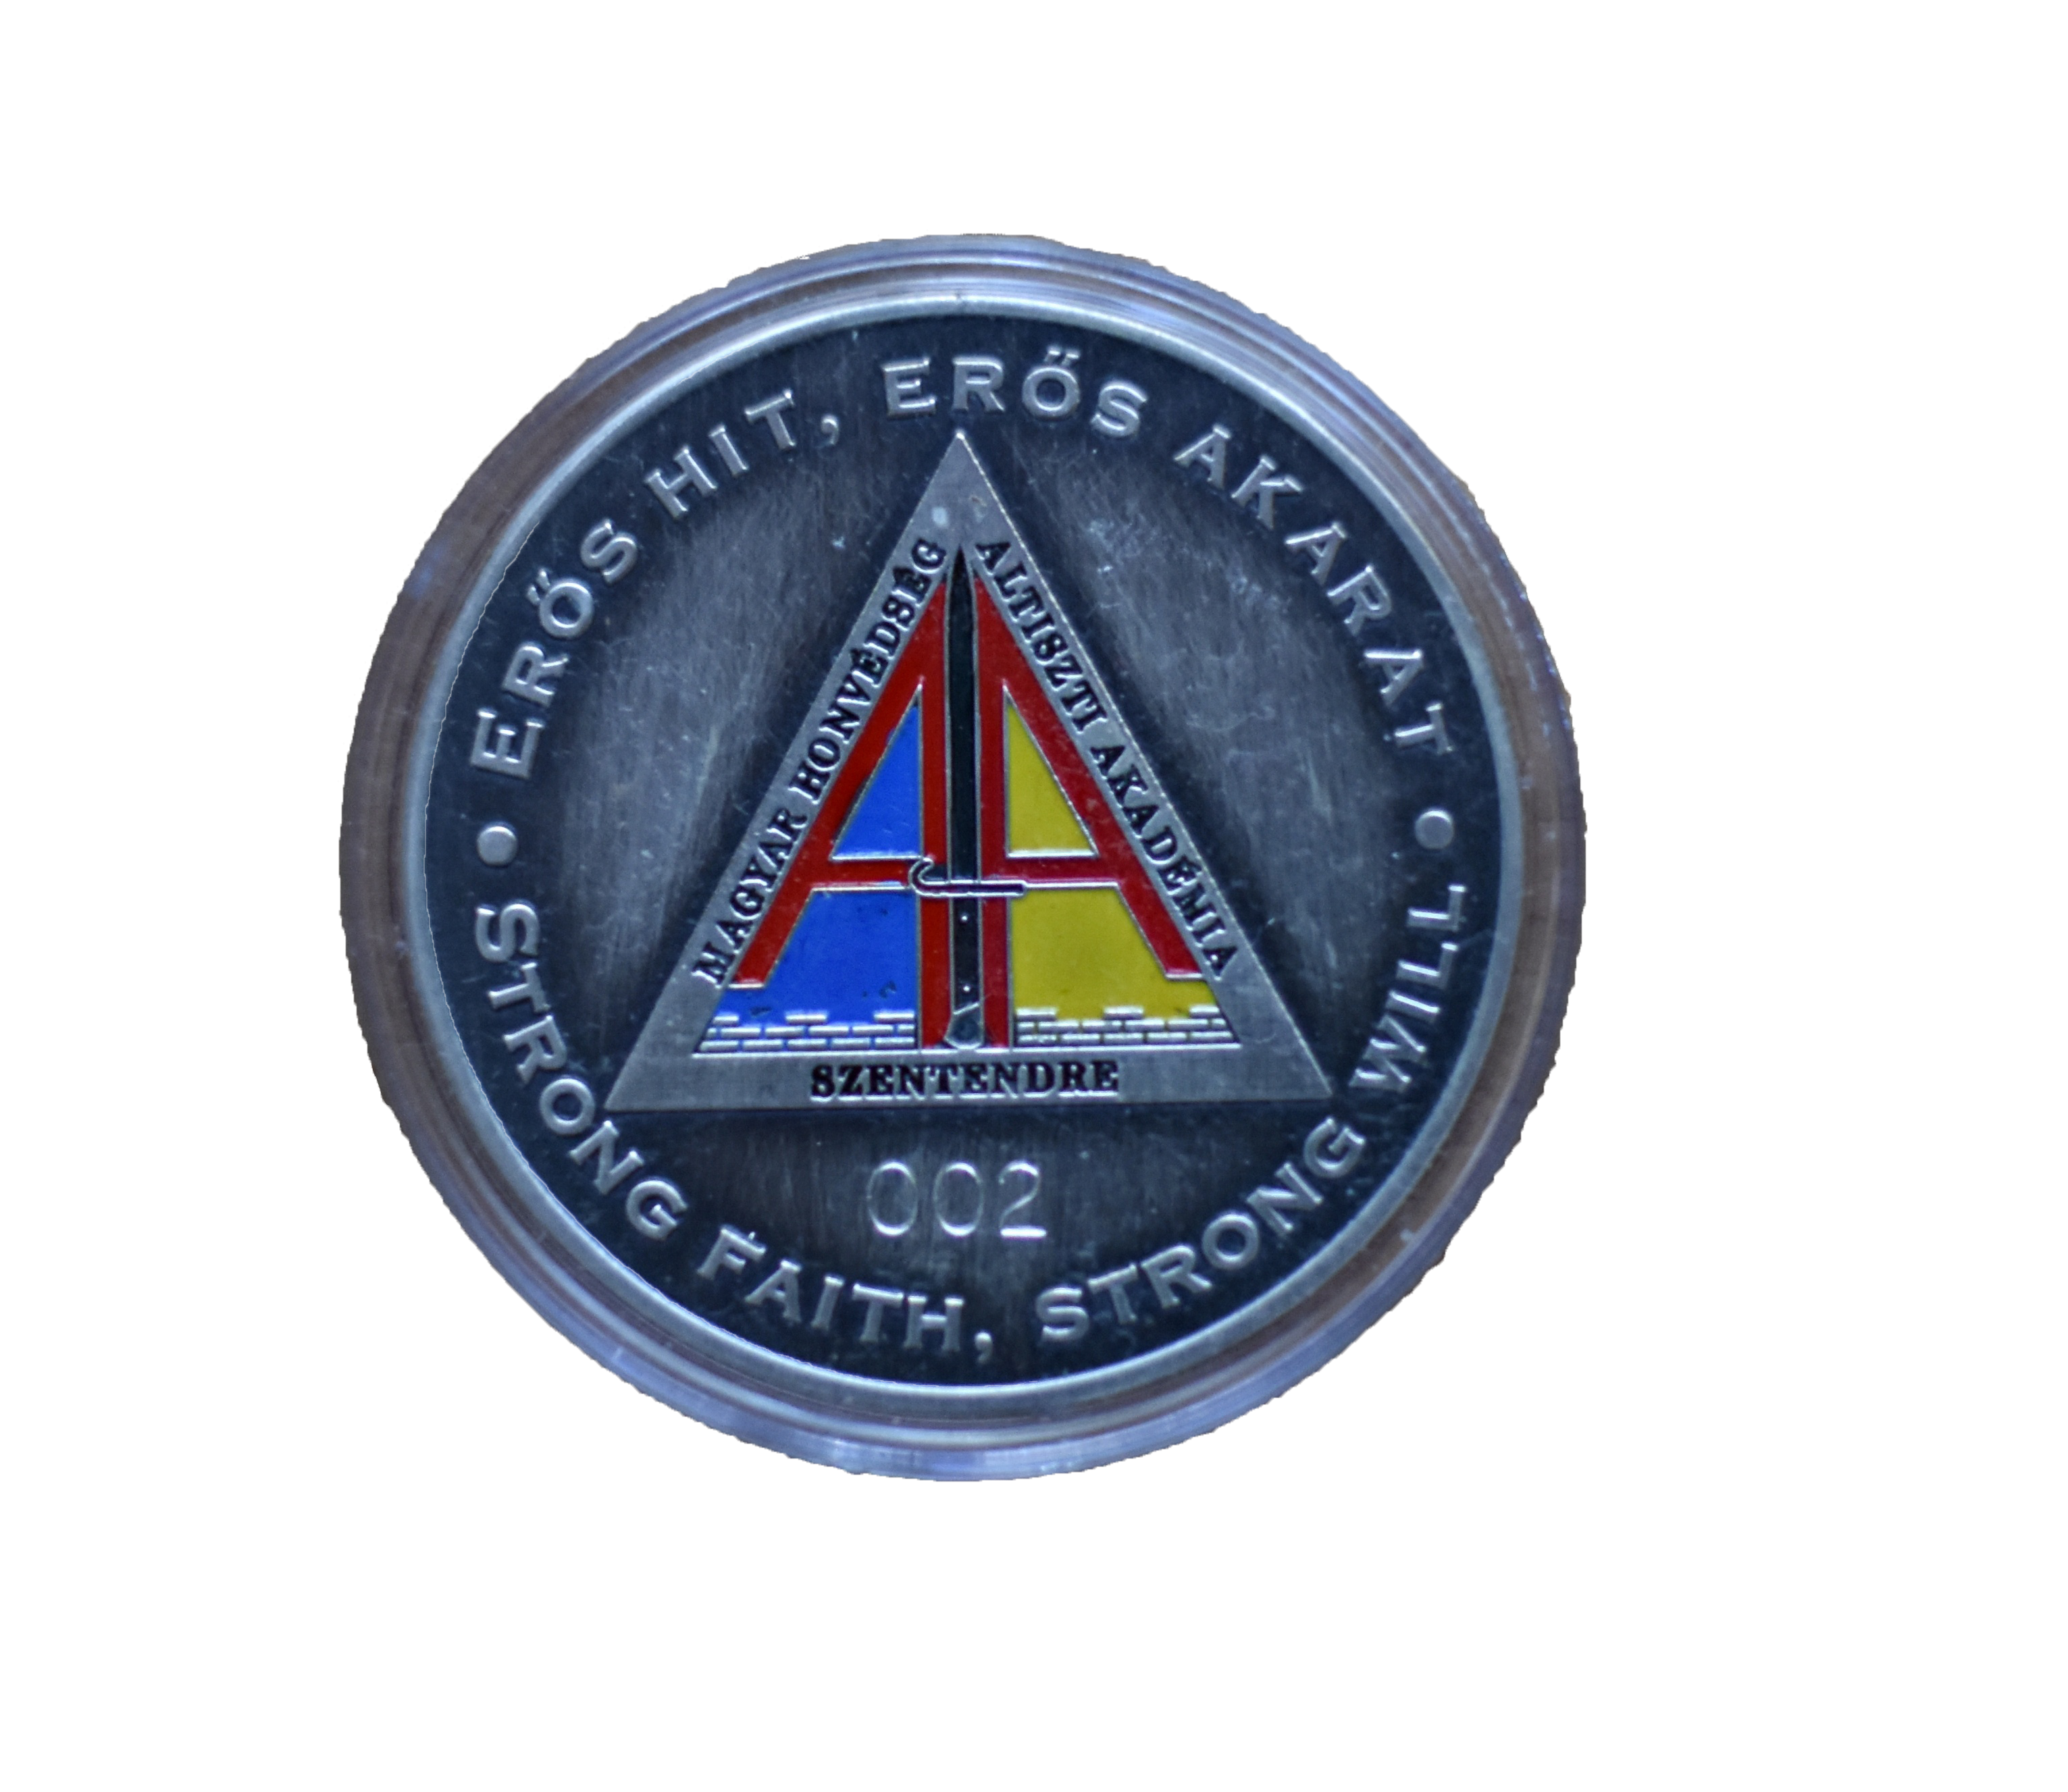 //mhaa.honvedseg.hu/wp-content/uploads/2021/08/kis-coin-425mm-front.png